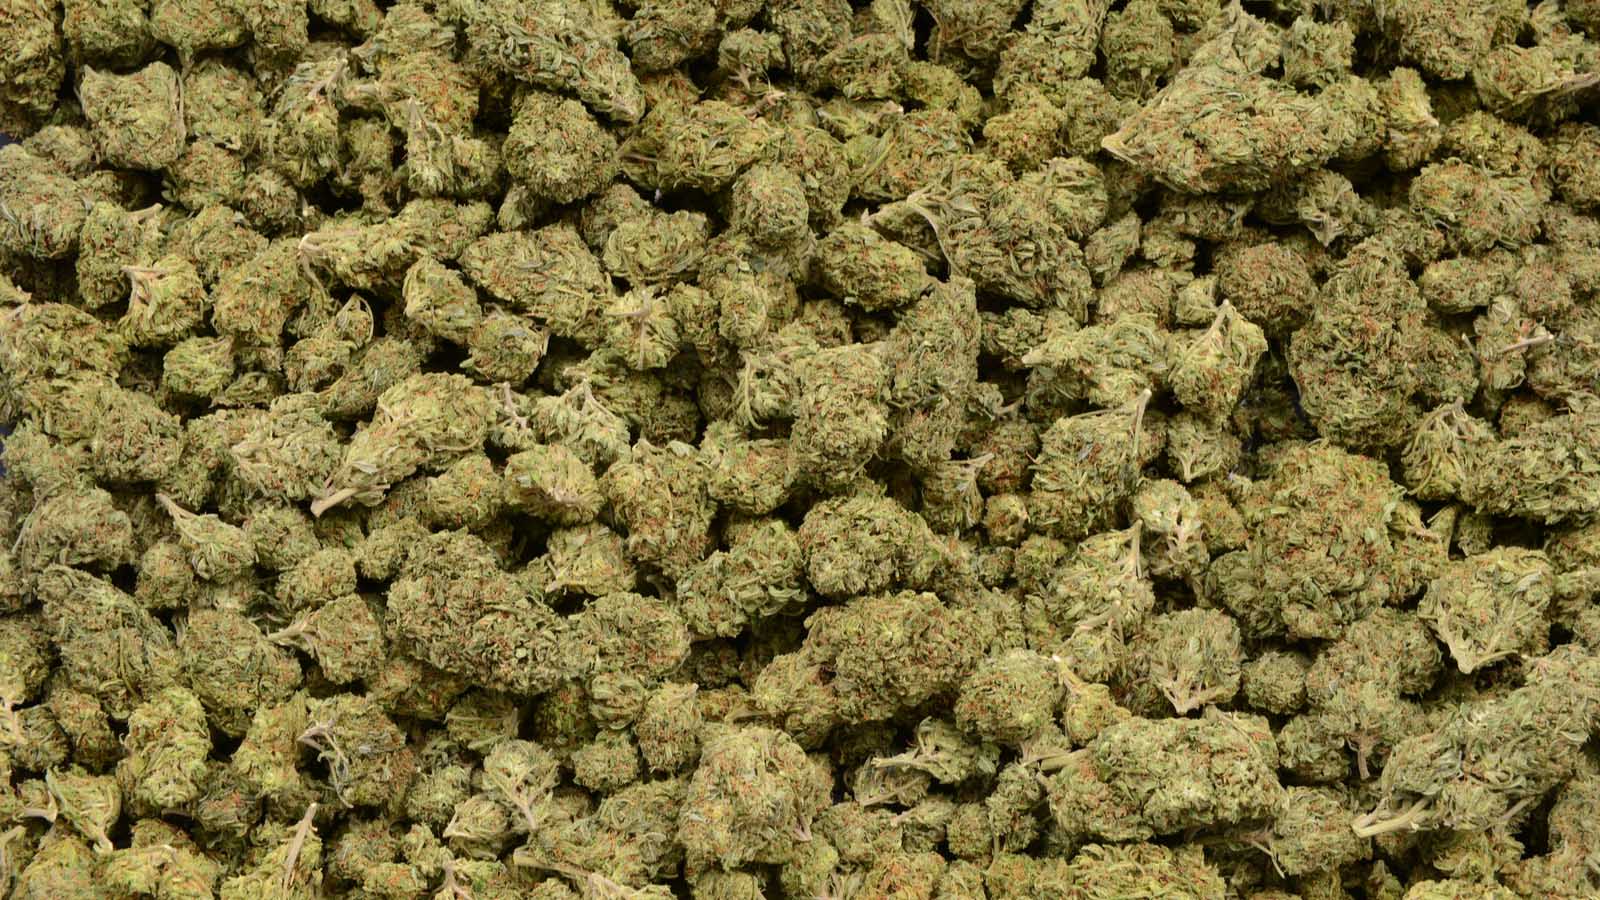 A pile of weed representing Hexo stock.